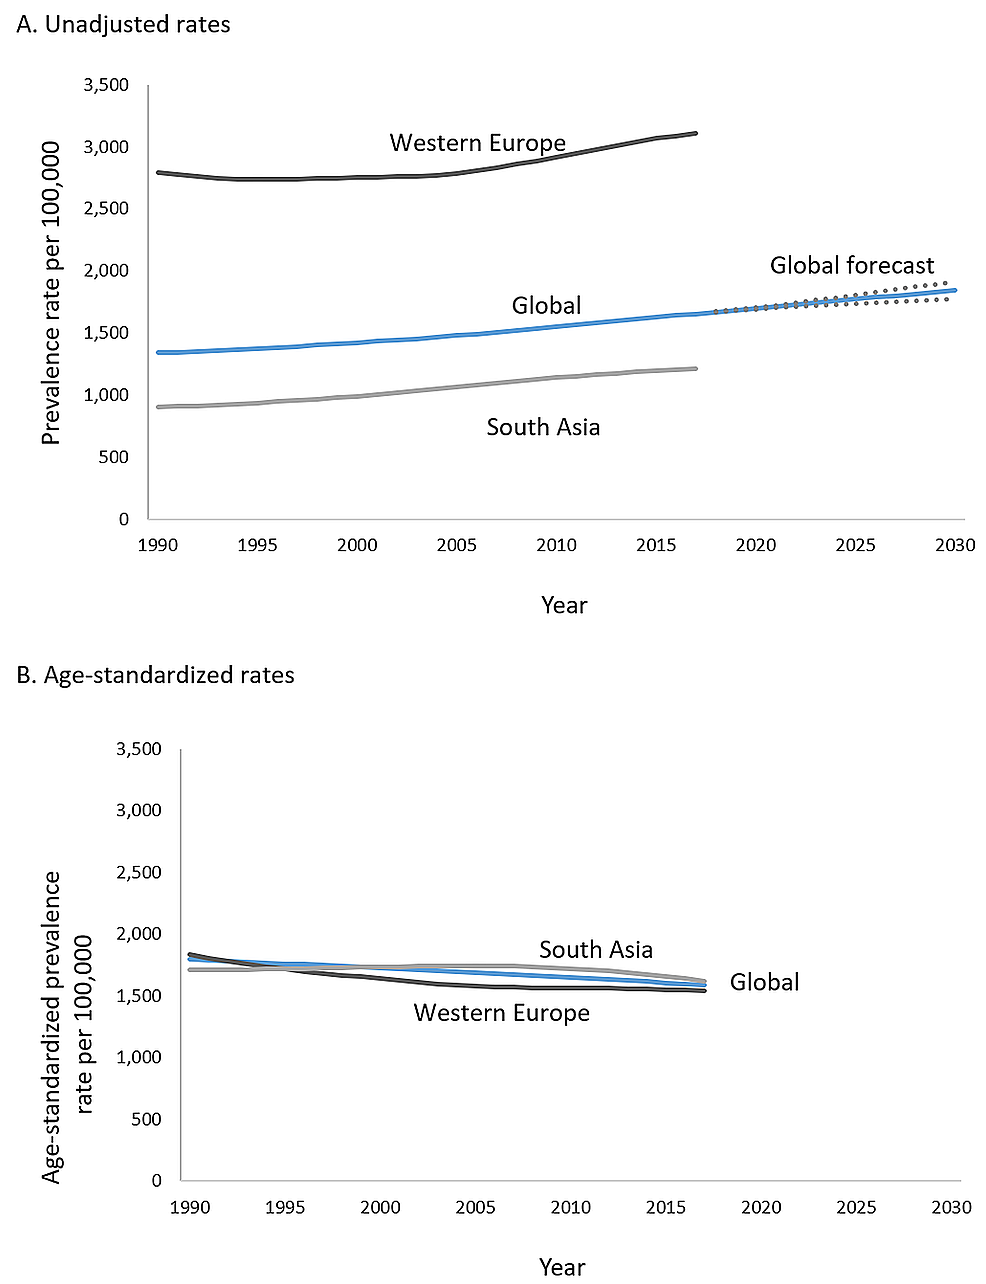 Trends-in-the-prevalence-of-ischemic-heart-disease-using-unadjusted-(A)-and-age-standardized-(B)-rates